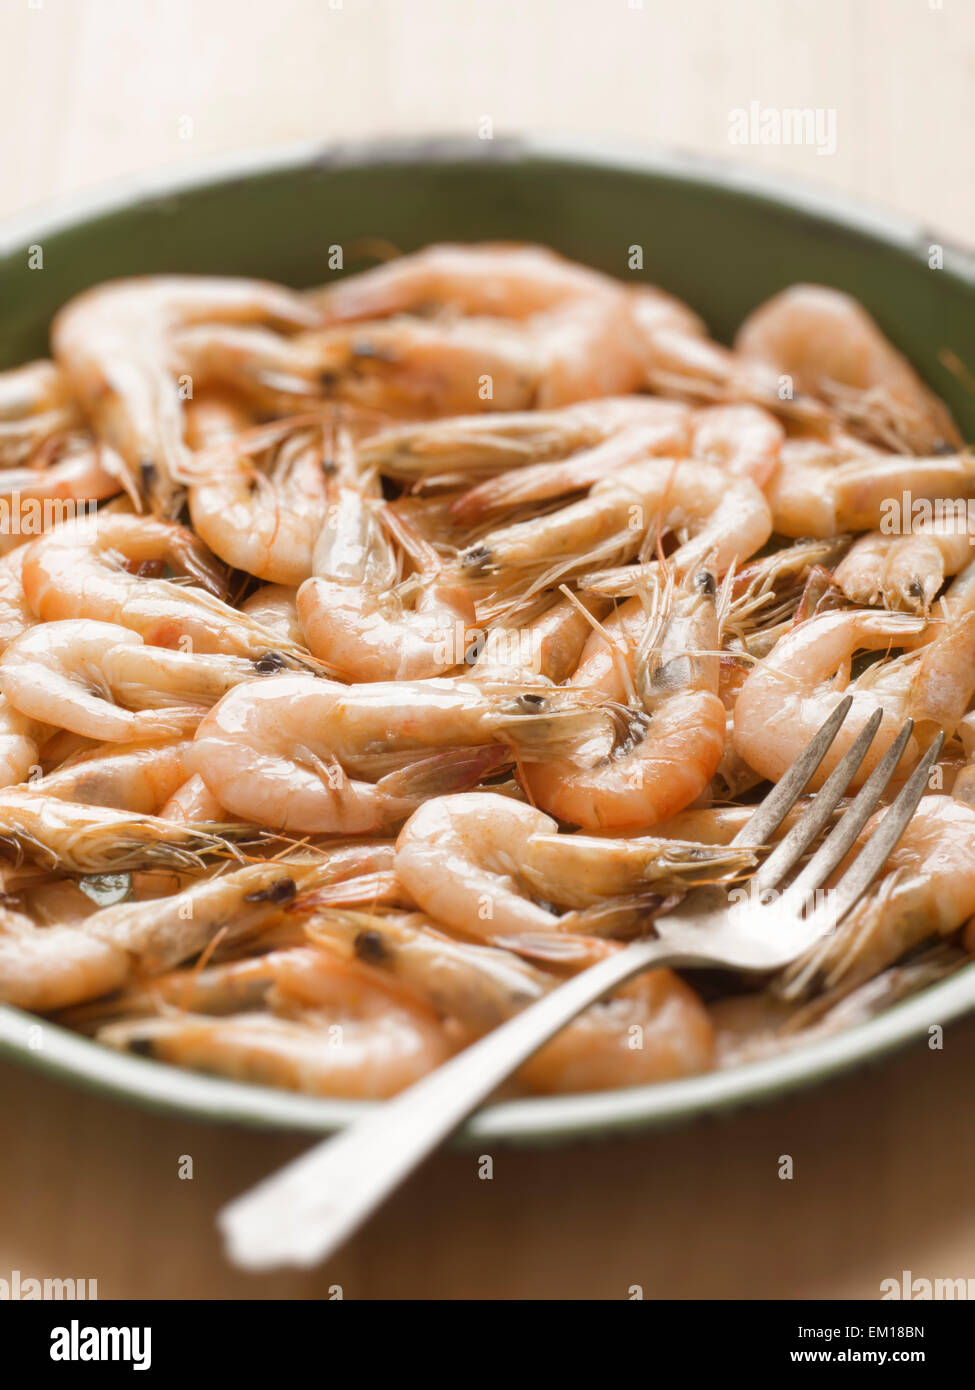 cooked shrimps Stock Photo